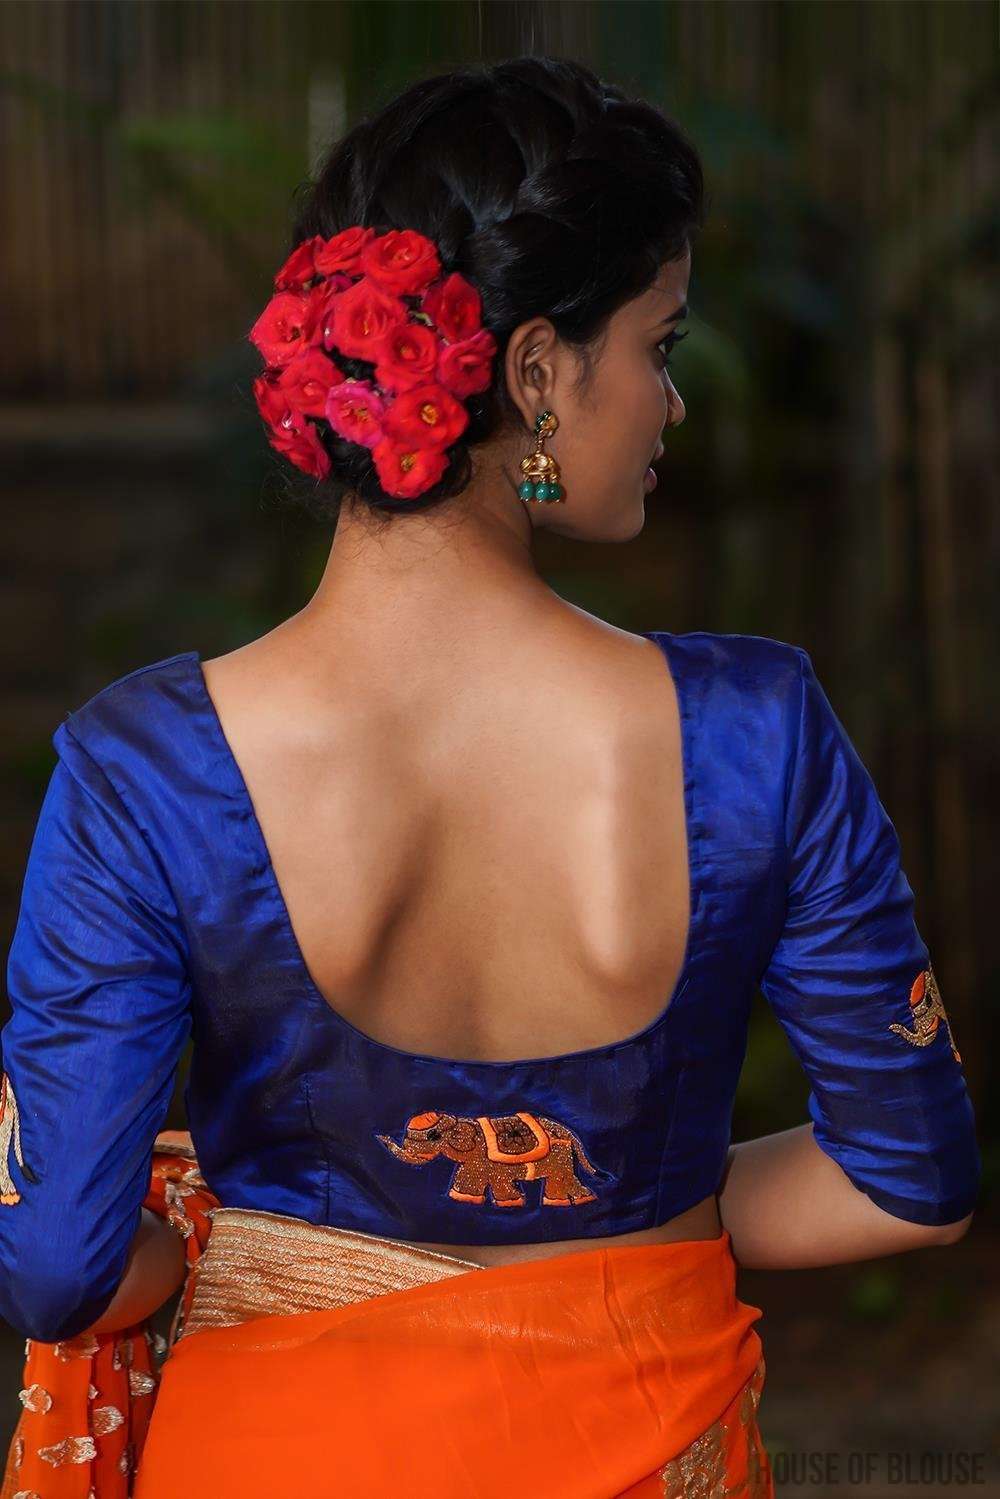 Royal blue semi silk blouse with embroidered elephant appliques - House of Blouse